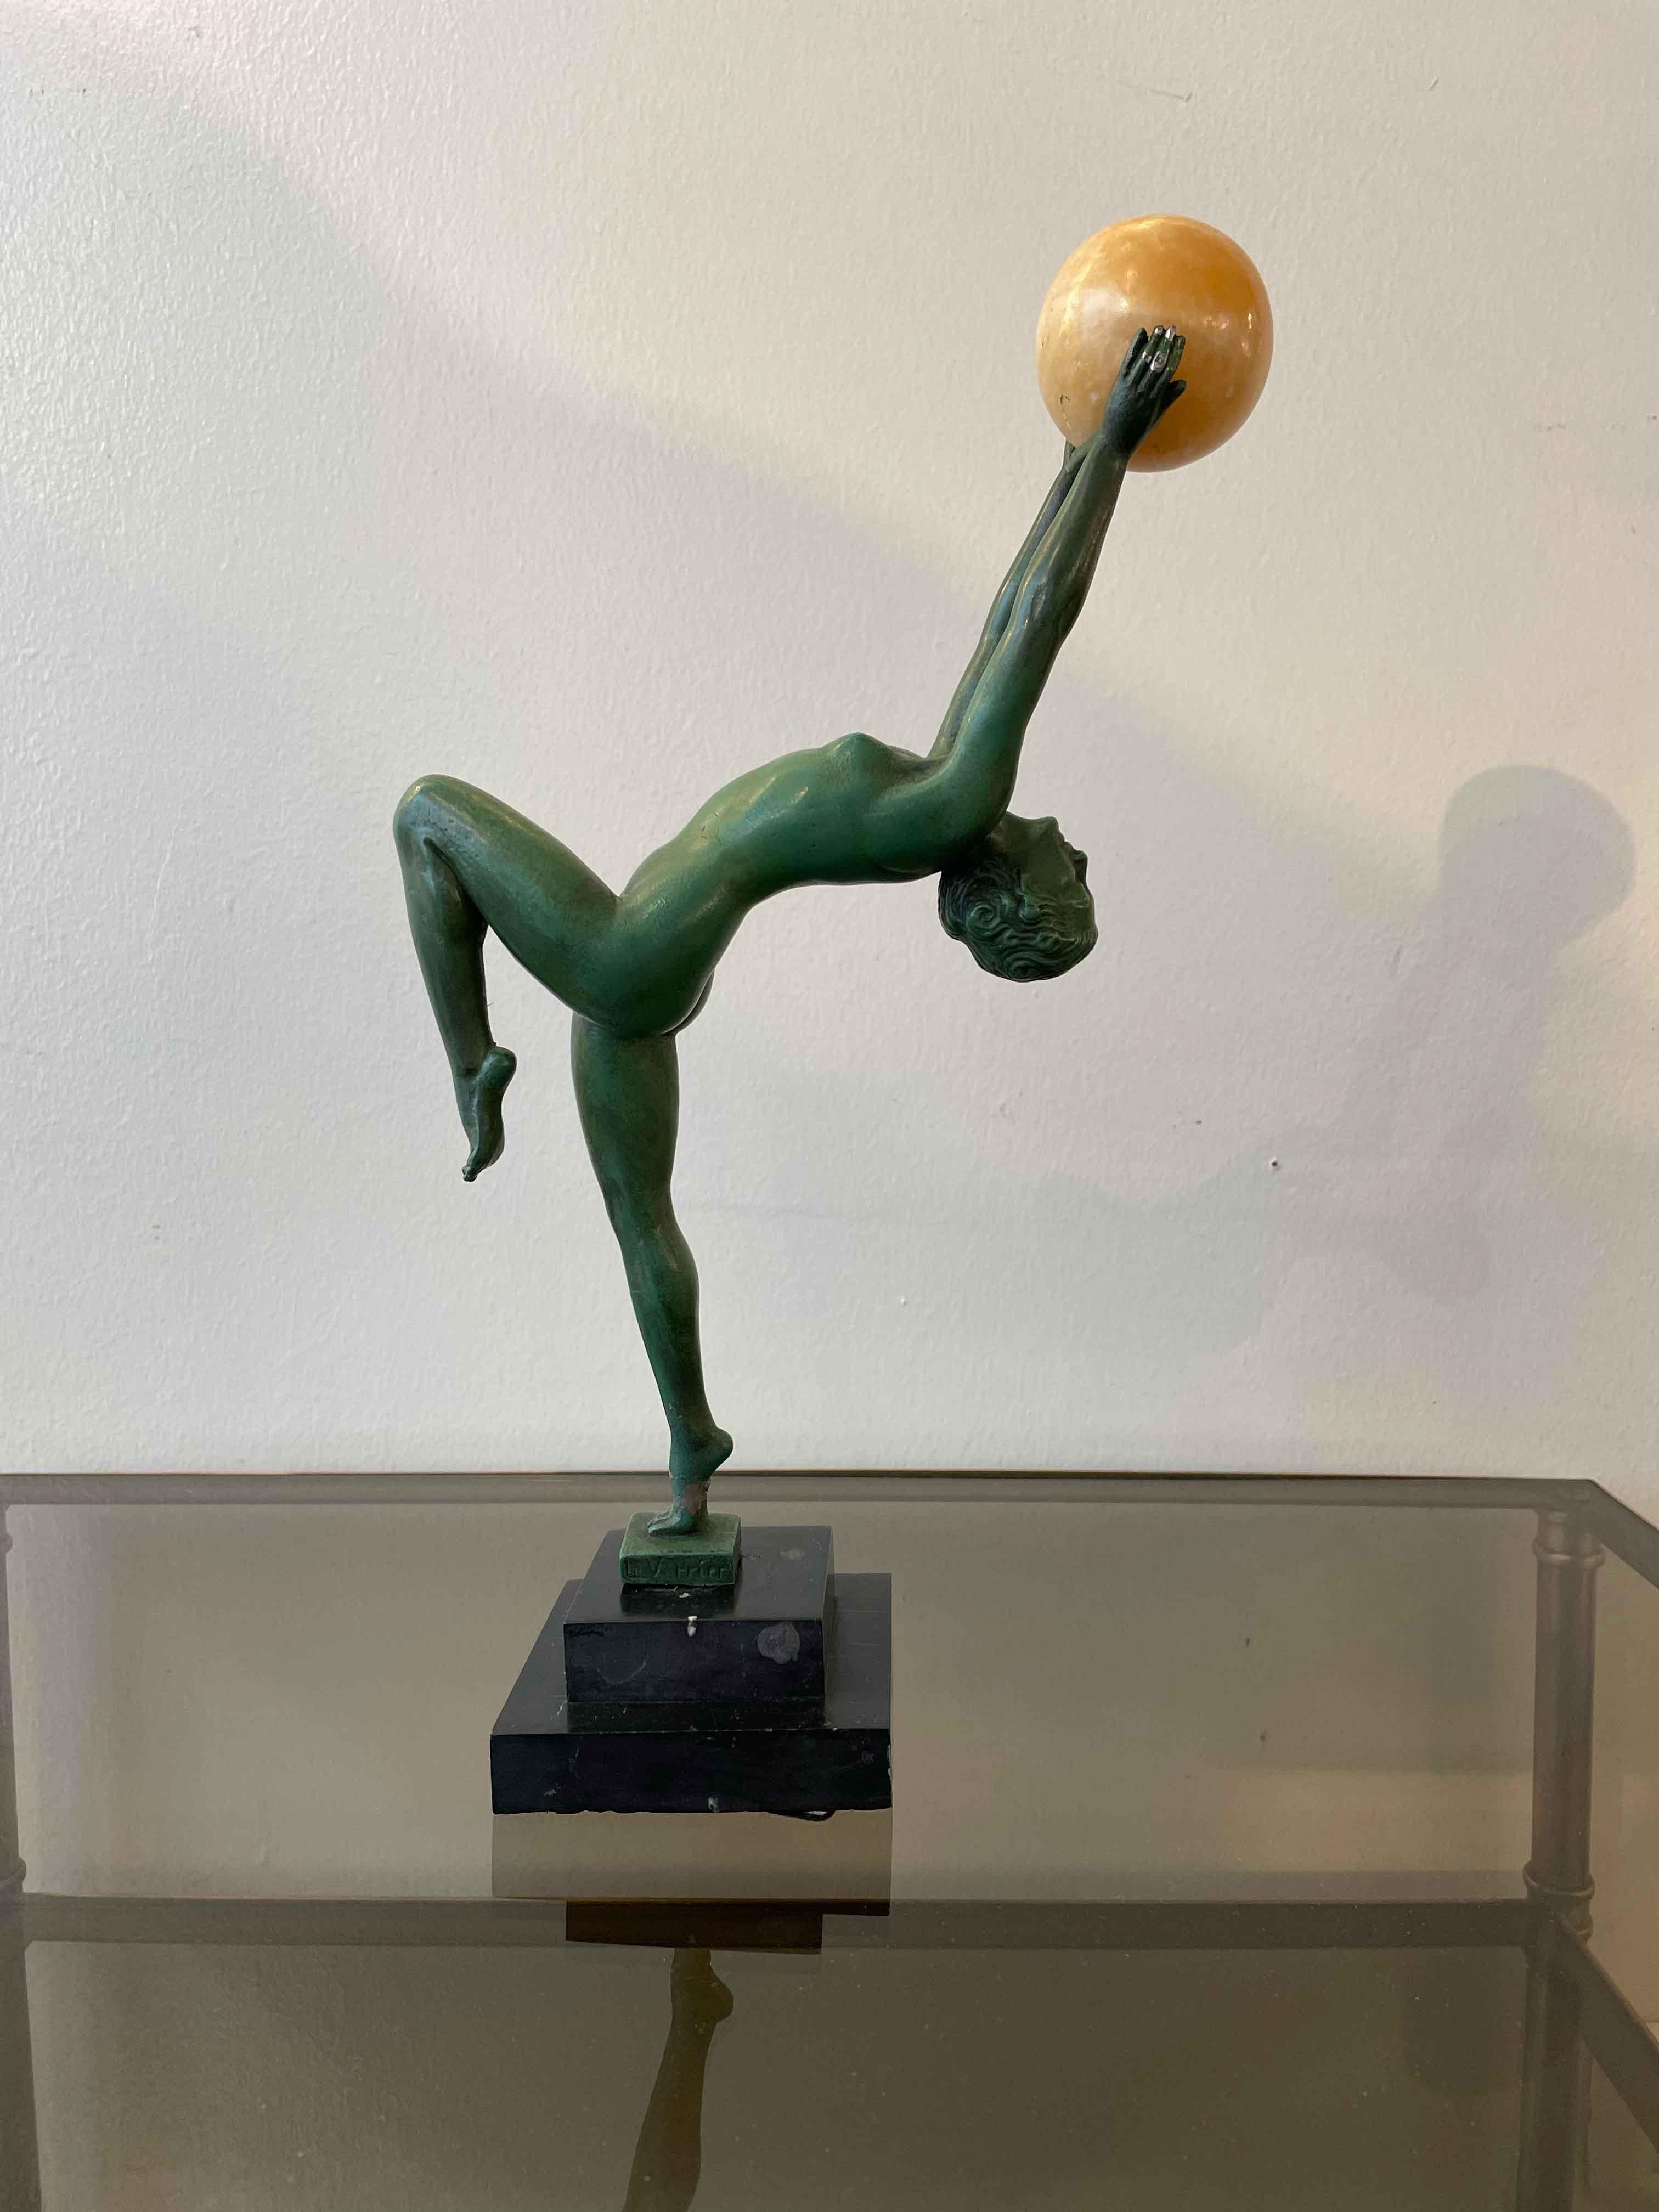 Art Deco sculpture of Juggler in patinated bronze by Le Verrier. 
The statue features a woman with very elegant and delicate movements. Max Le Verrier was known for being a pioneer within the Parisian Art Deco movement, creating decorative art